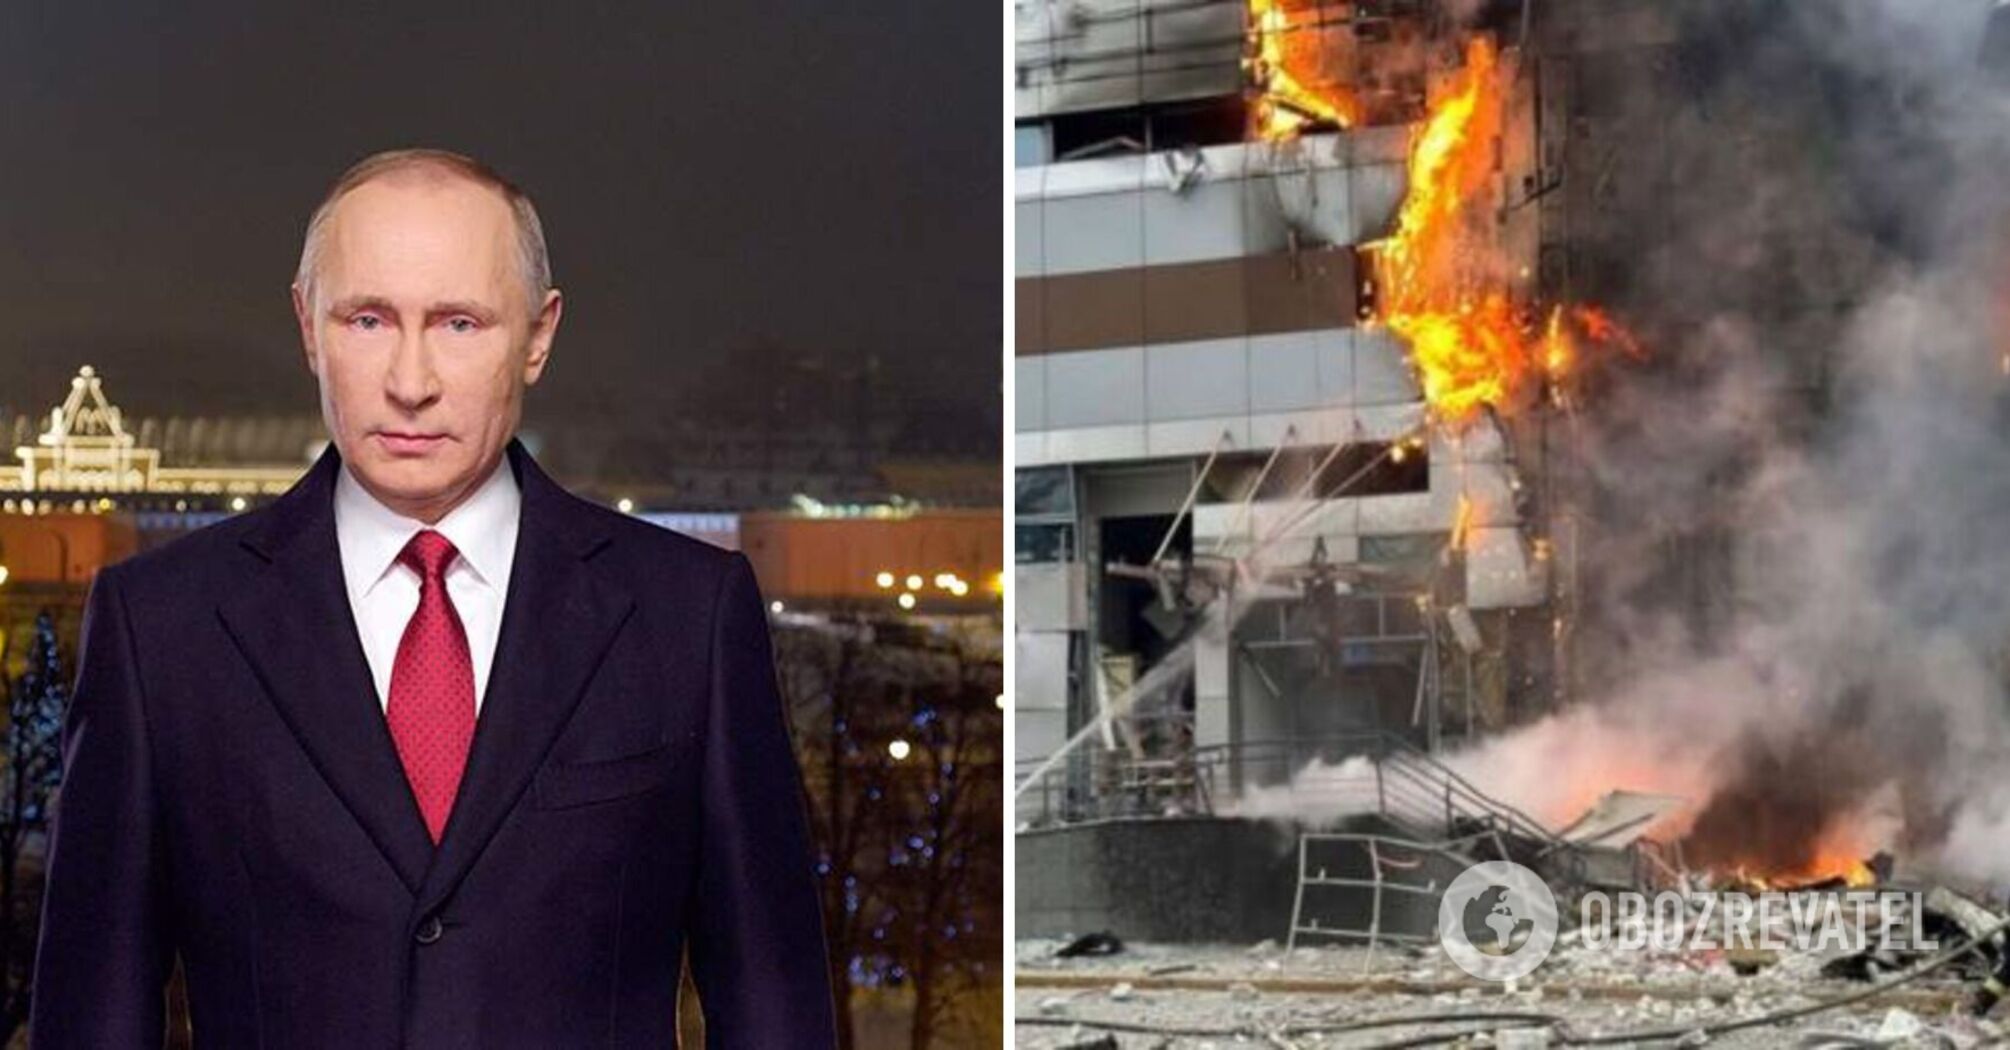 While the rubble is still being cleared in Kyiv, Putin's New Year's address this time without the military